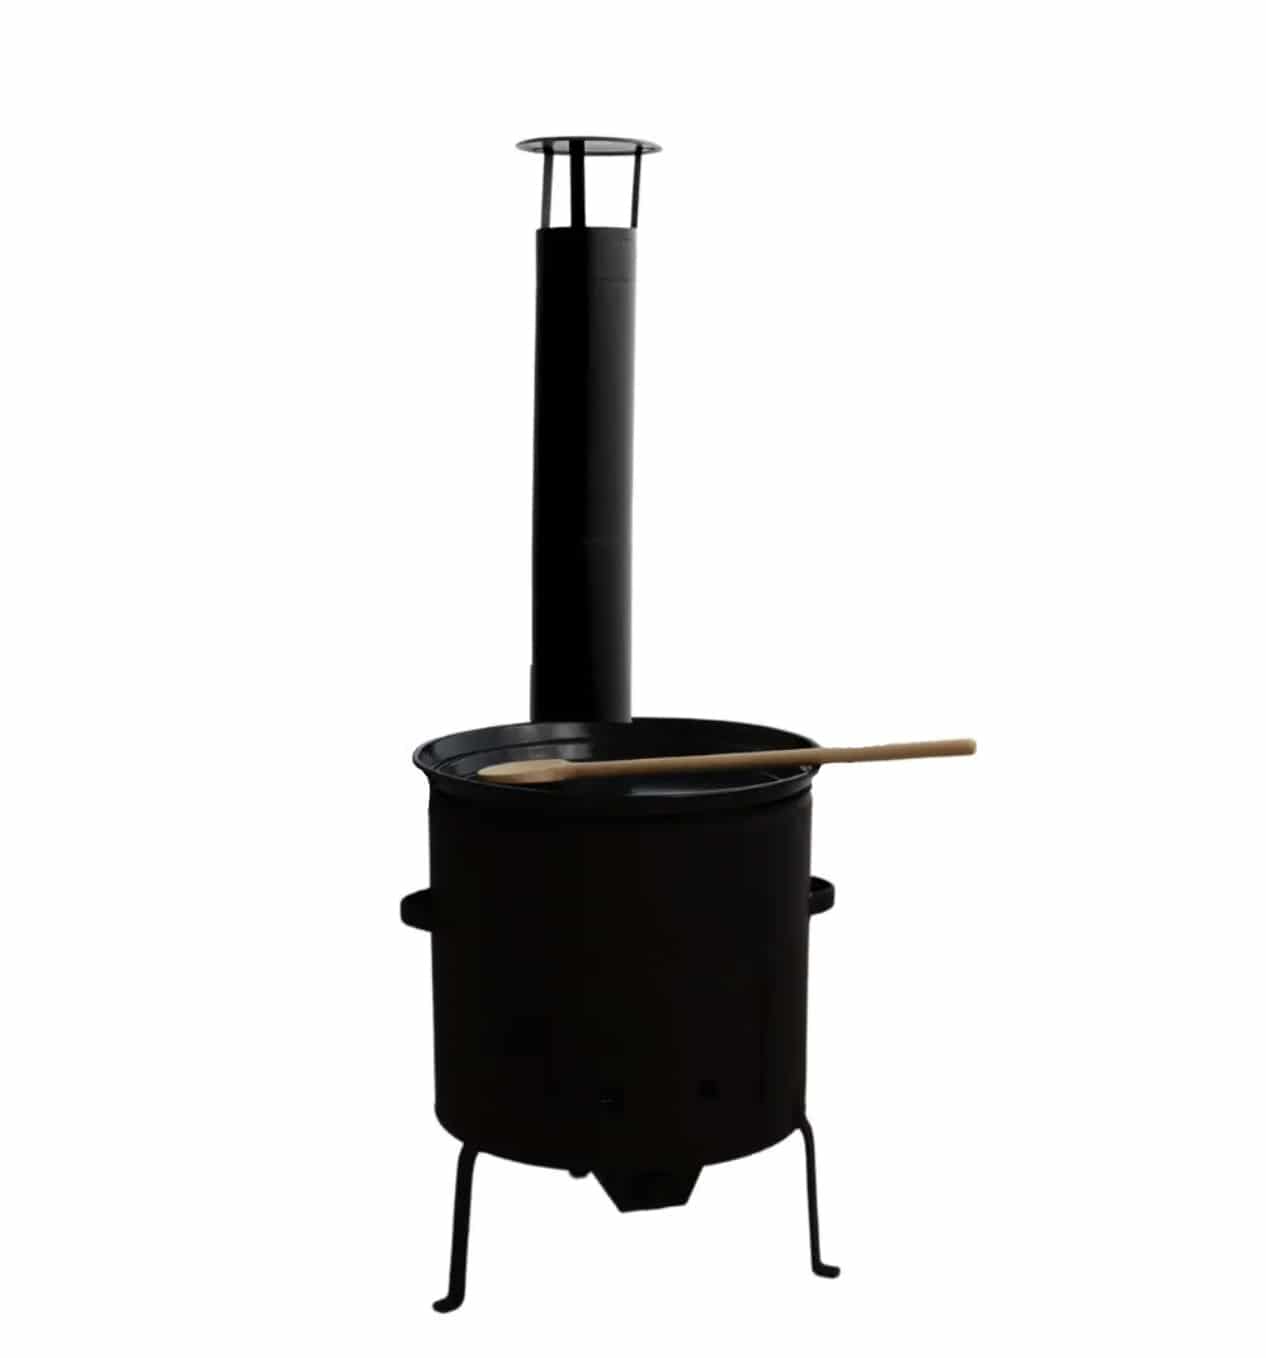 Outdoor cooking stove with griddle and wooden spoon